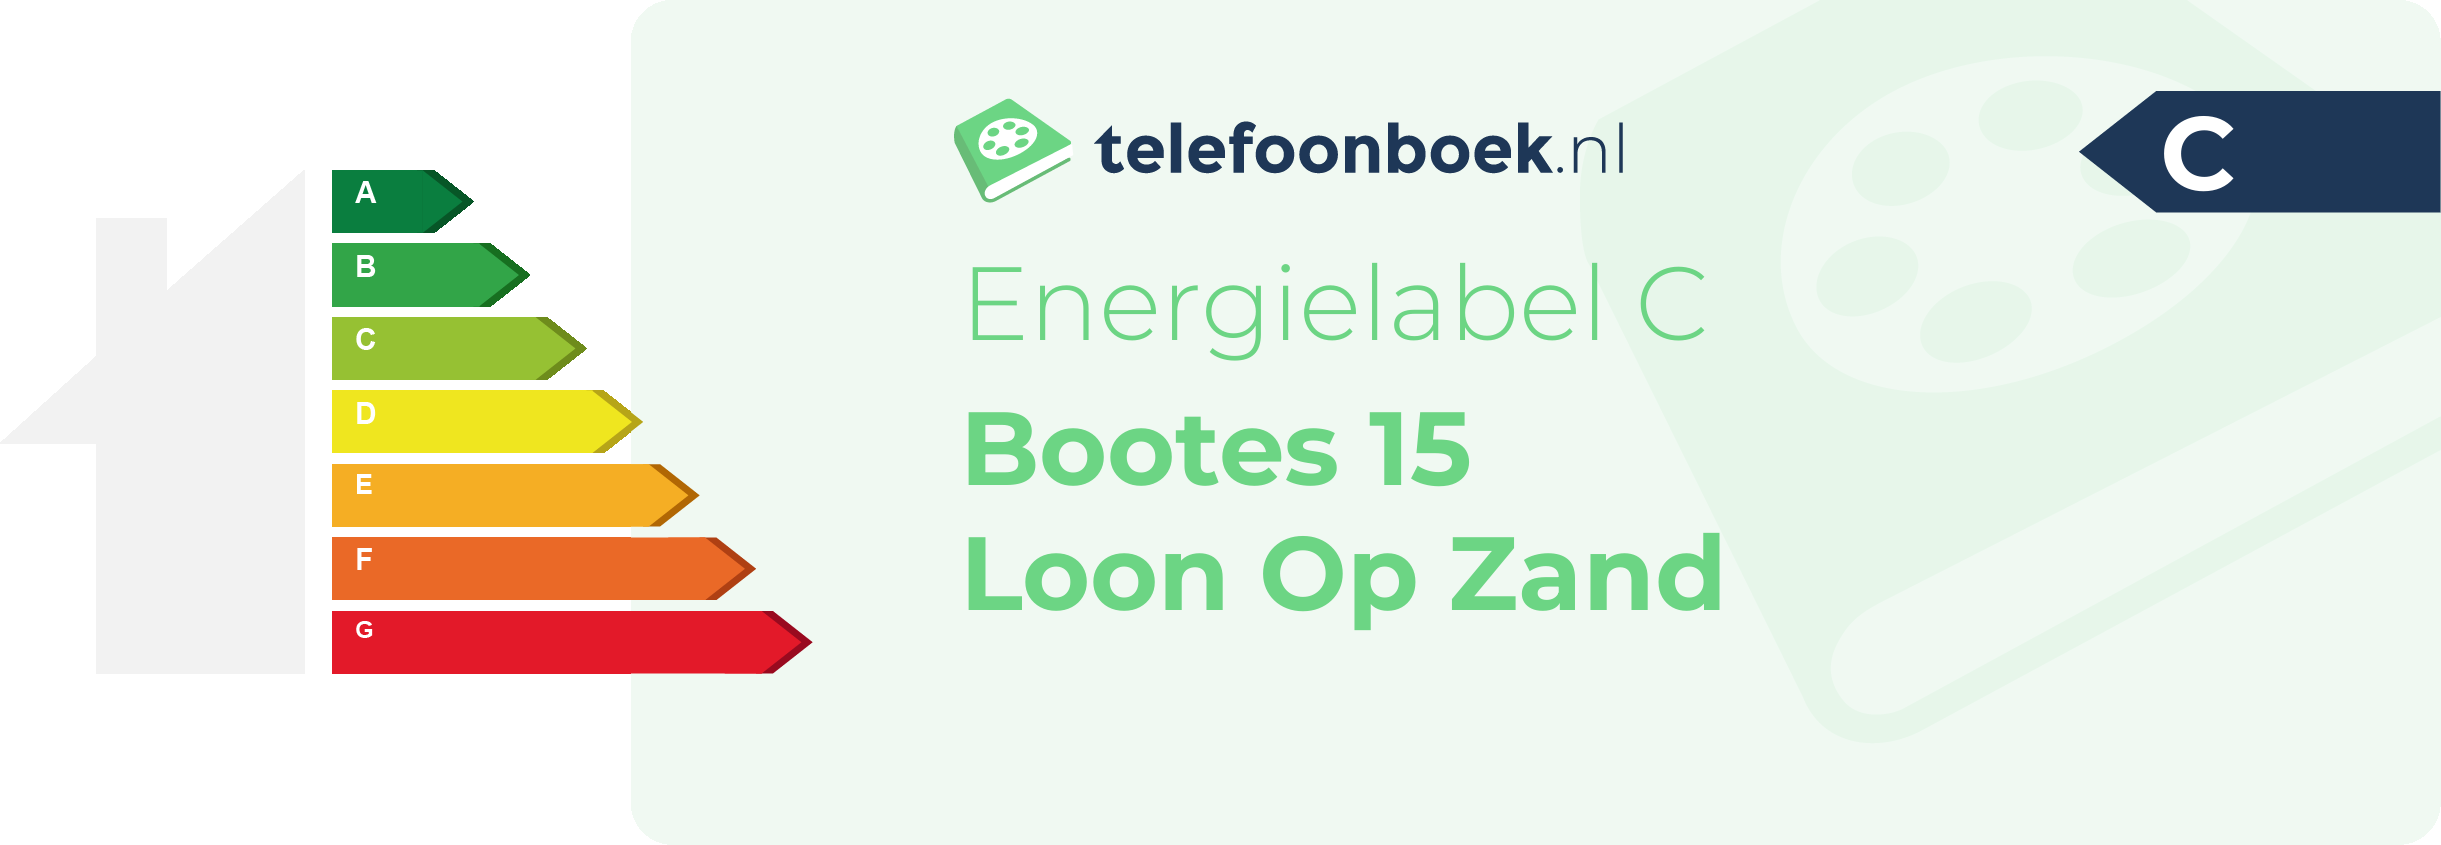 Energielabel Bootes 15 Loon Op Zand